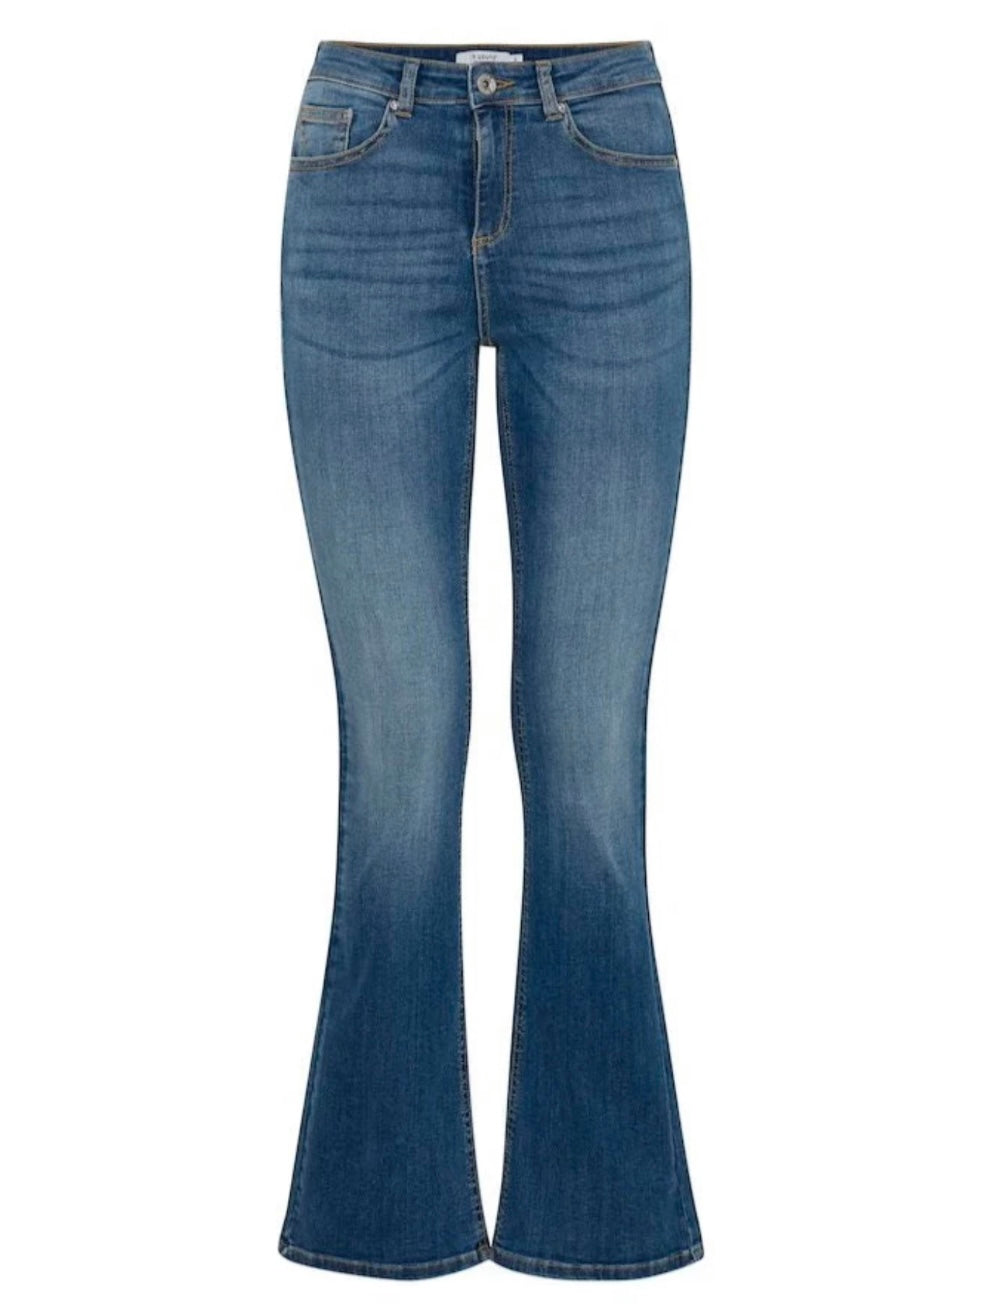 Faded Blue Lola Denim Kick Flare Jeans by B.Young